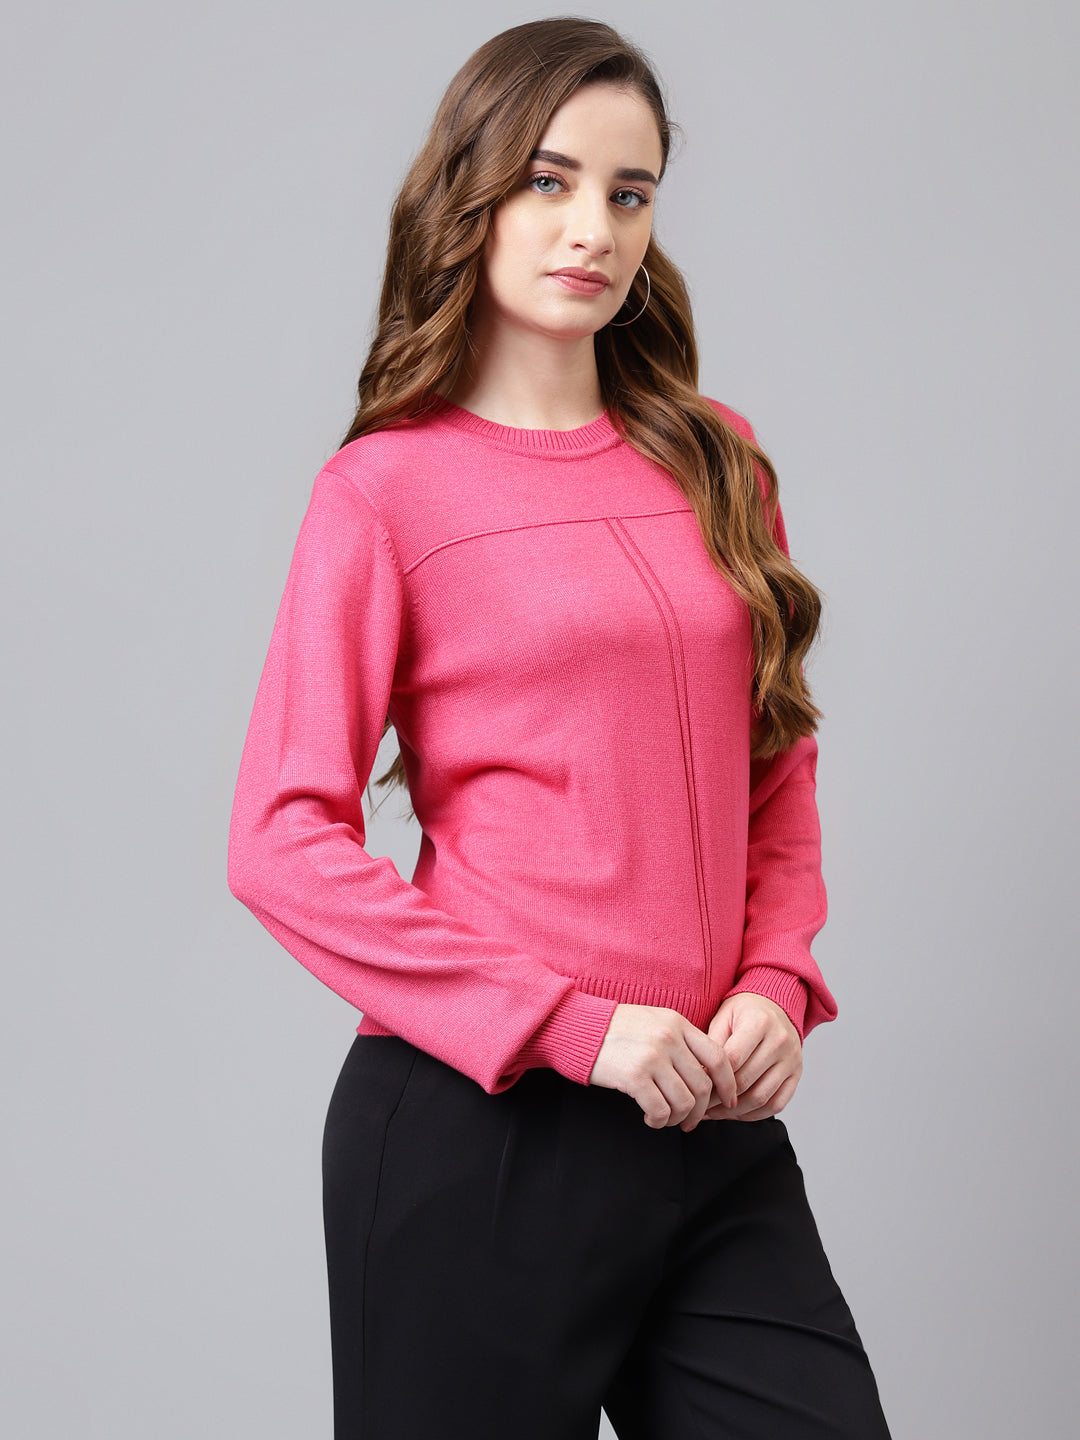 Fuchsia Full Sleeve Solid Women Pullover Sweater Top for Casual